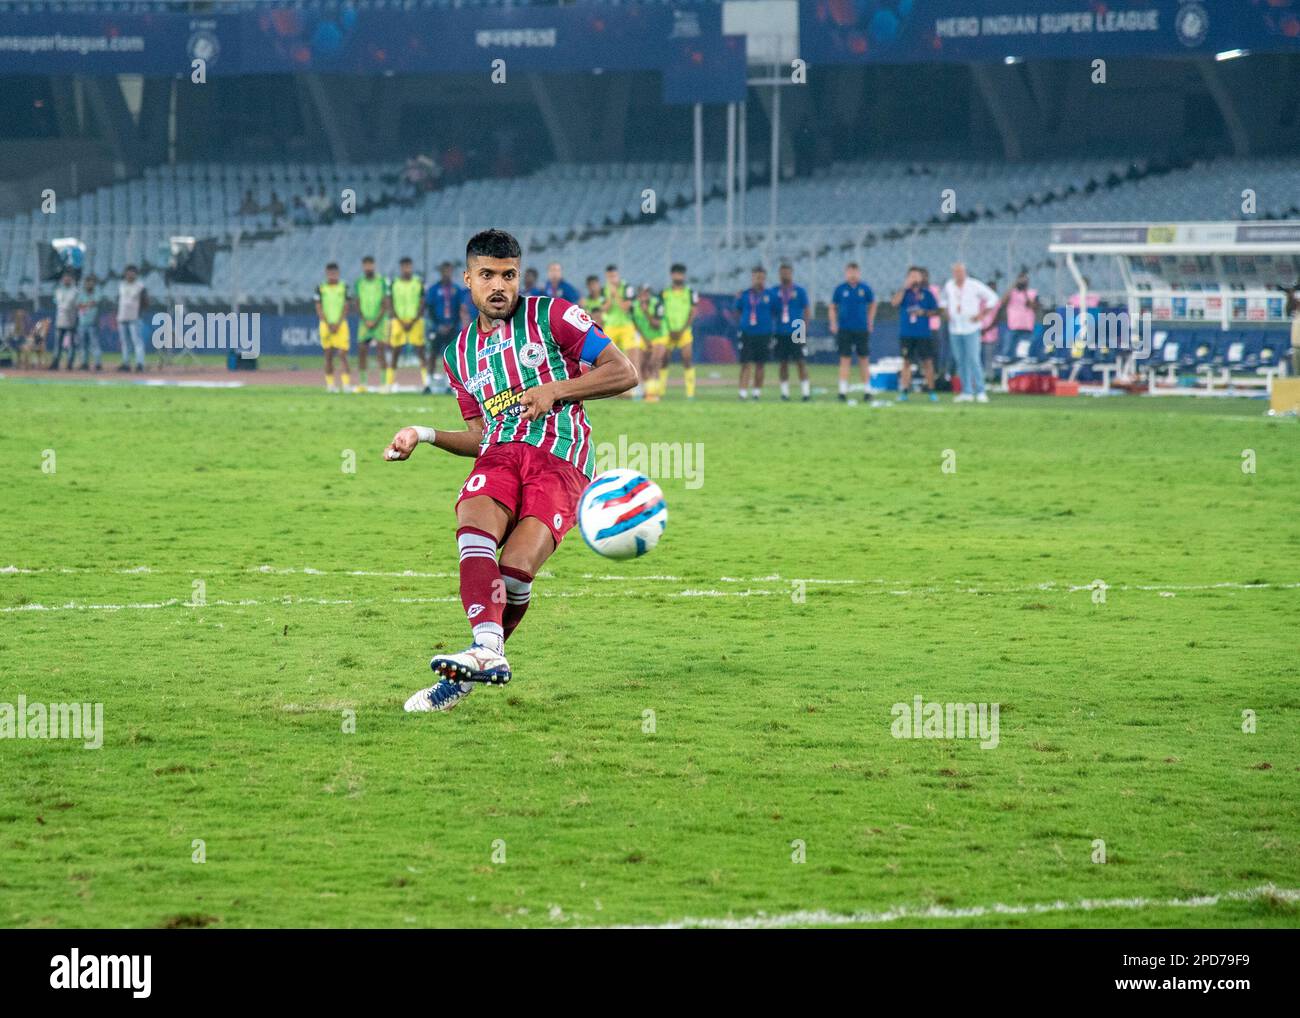 Kolkata, India. 13th Mar, 2023. ATKMB beats Hyderabad FC on a penalty shoot-out (4-3 result) in Hero Indian Super League 2022-23 (2nd leg semifinal) at VYBK Stadium, Kolkata on 13th March 2023. Both ATK Mohun Bagan and Hyderabad FC fail to find the desired goal in regulation time. ATKMB will meet Bengaluru FC in this year's ISL (Indian Super League) Final at Fatorda Stadium, Goa on 18th March 2023. (Photo by Amlan Biswas/Pacific Press/Sipa USA) Credit: Sipa USA/Alamy Live News Stock Photo